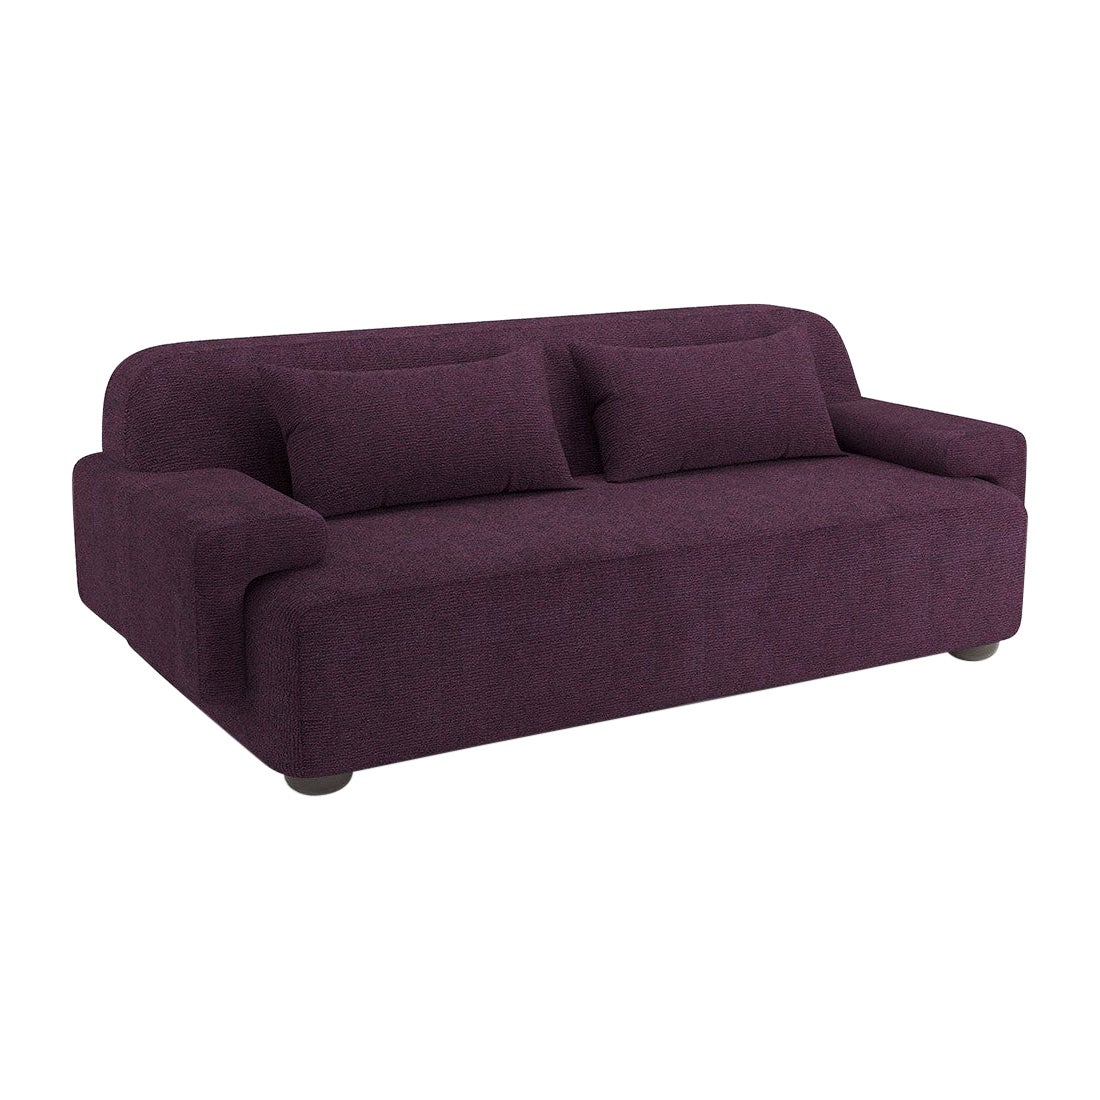 Popus Editions Lena 3 Seater Sofa in Eggplant Megeve Fabric with Knit Effect For Sale